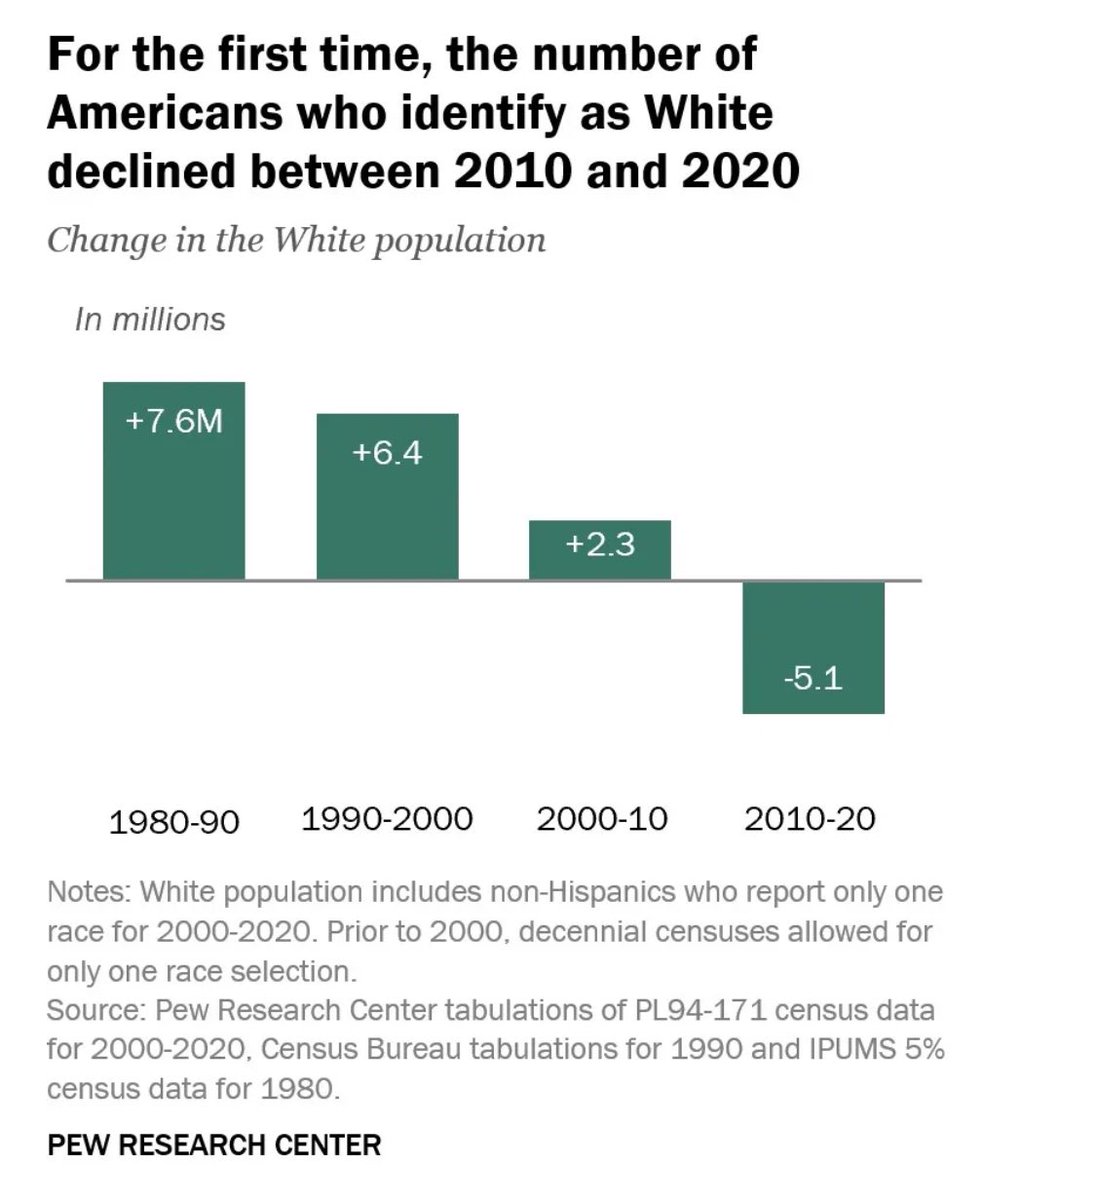 The white population in the United States is declining in numbers — the 2020 census revealed a 3% decrease in the non-Hispanic White population identifying with a single race, amounting to approximately 5.1 million people fewer than in 2010. This decline was observed across 35…